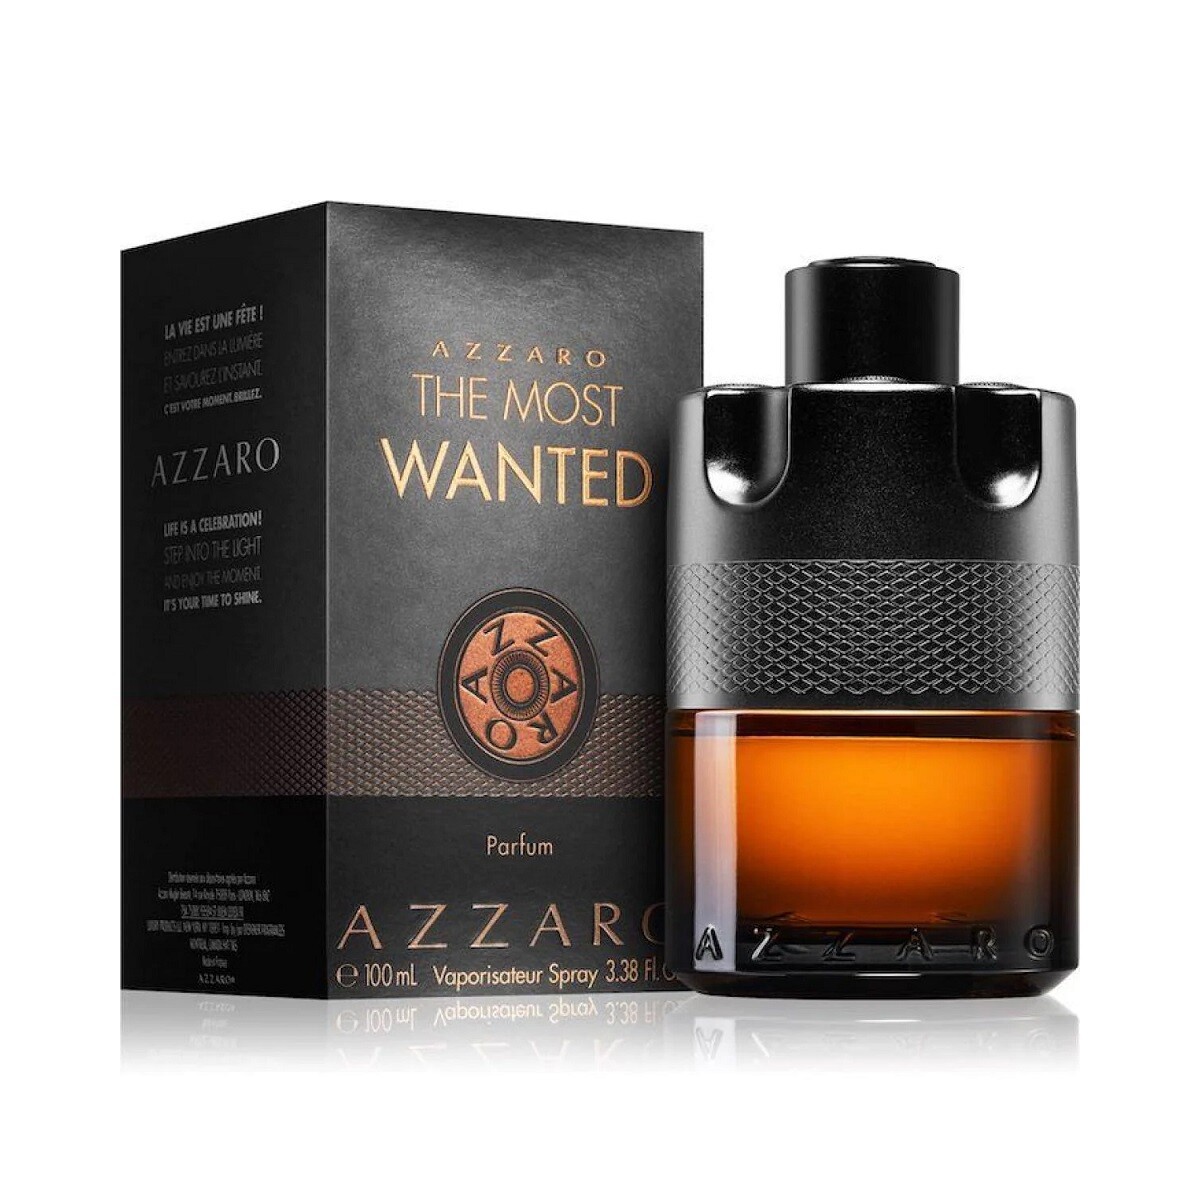 Perfume Azzaro The Most Wanted Parfum 100 Ml. 